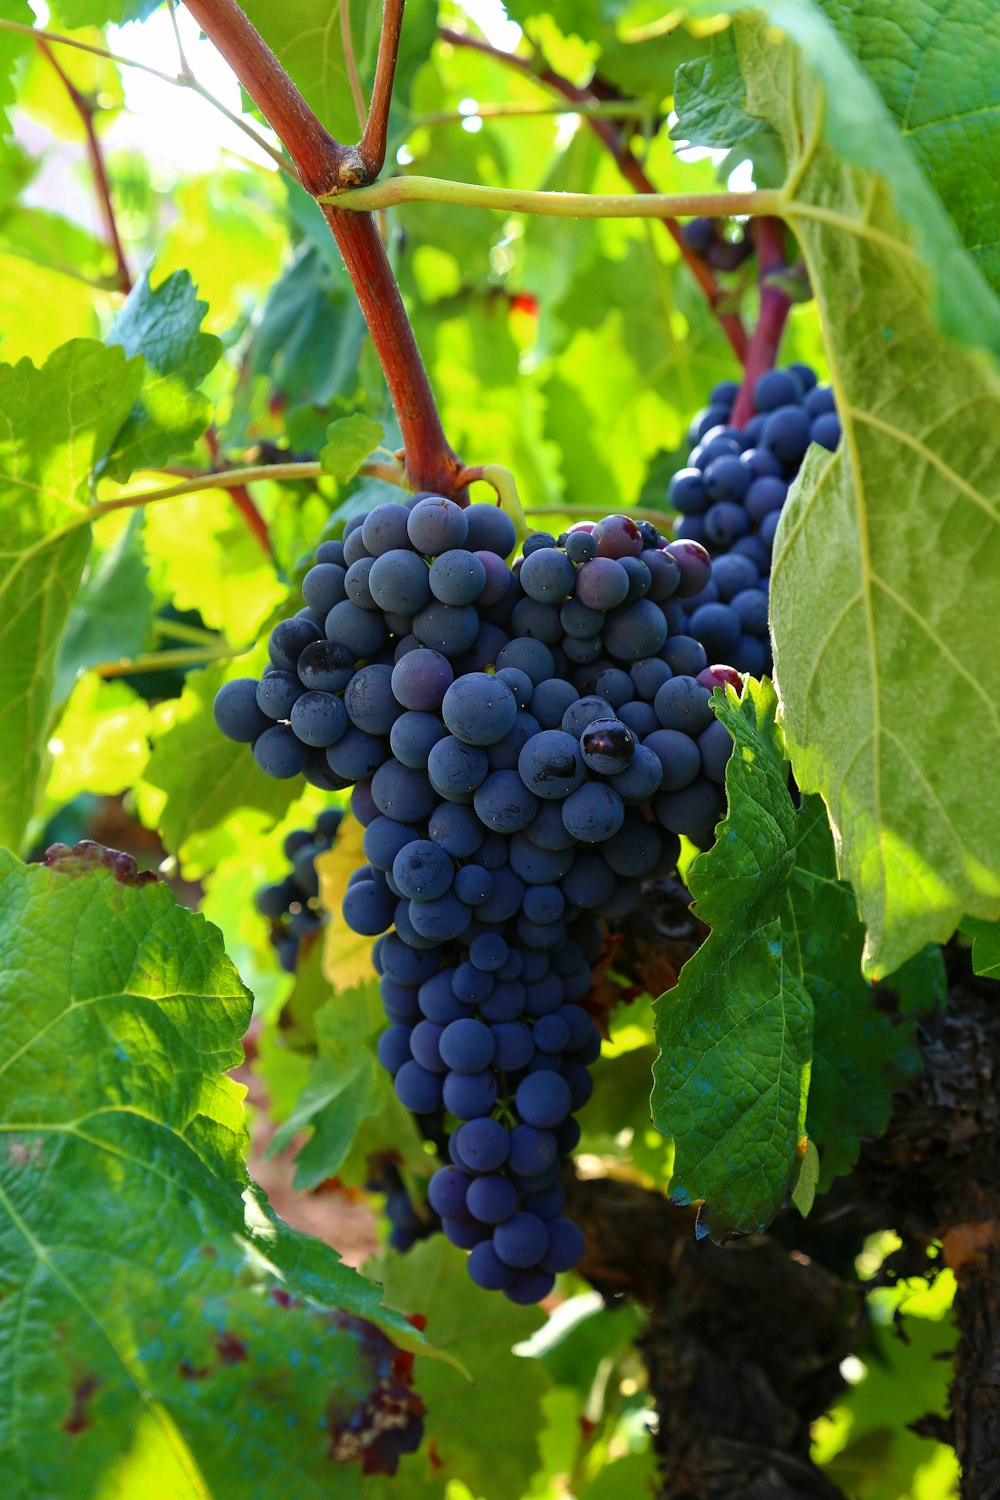 view of grapes on tree